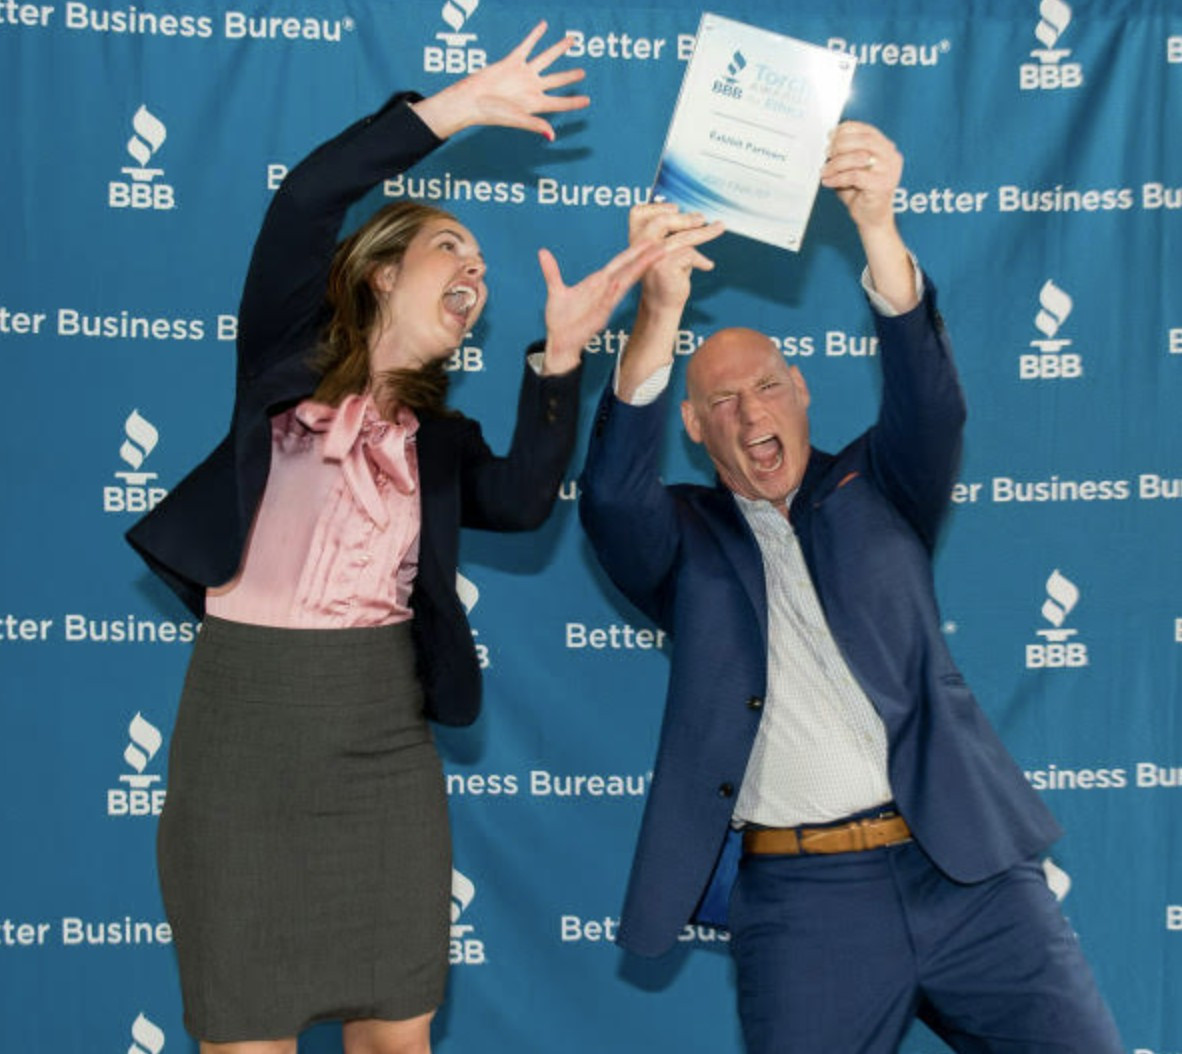 CEO and exec assistant taking a goofy photo at a Ethics Award Ceremony through BBB Torch awards